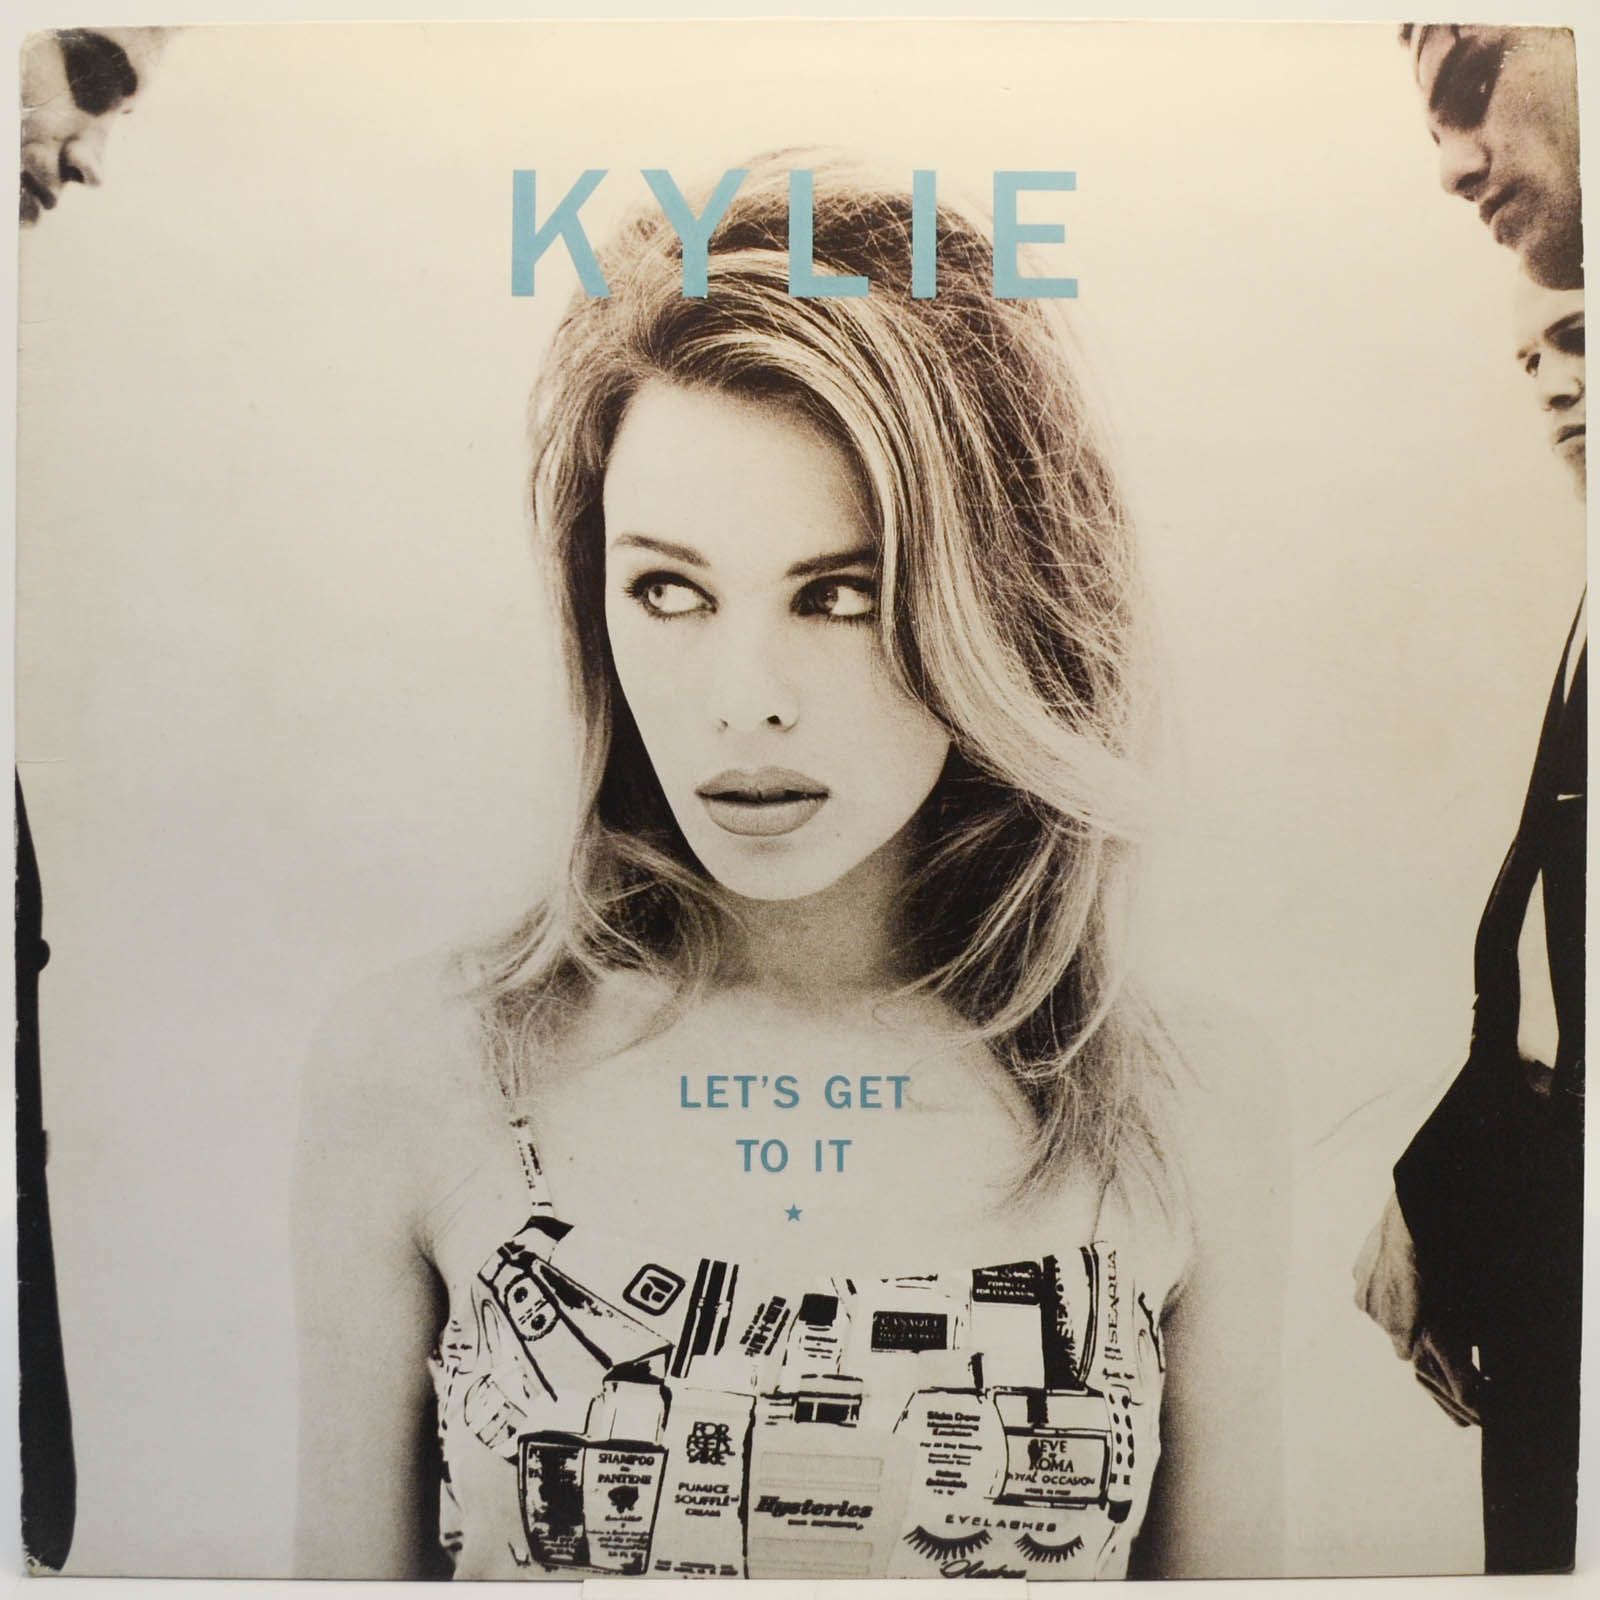 Kylie Minogue — Let's Get To It (UK), 1991